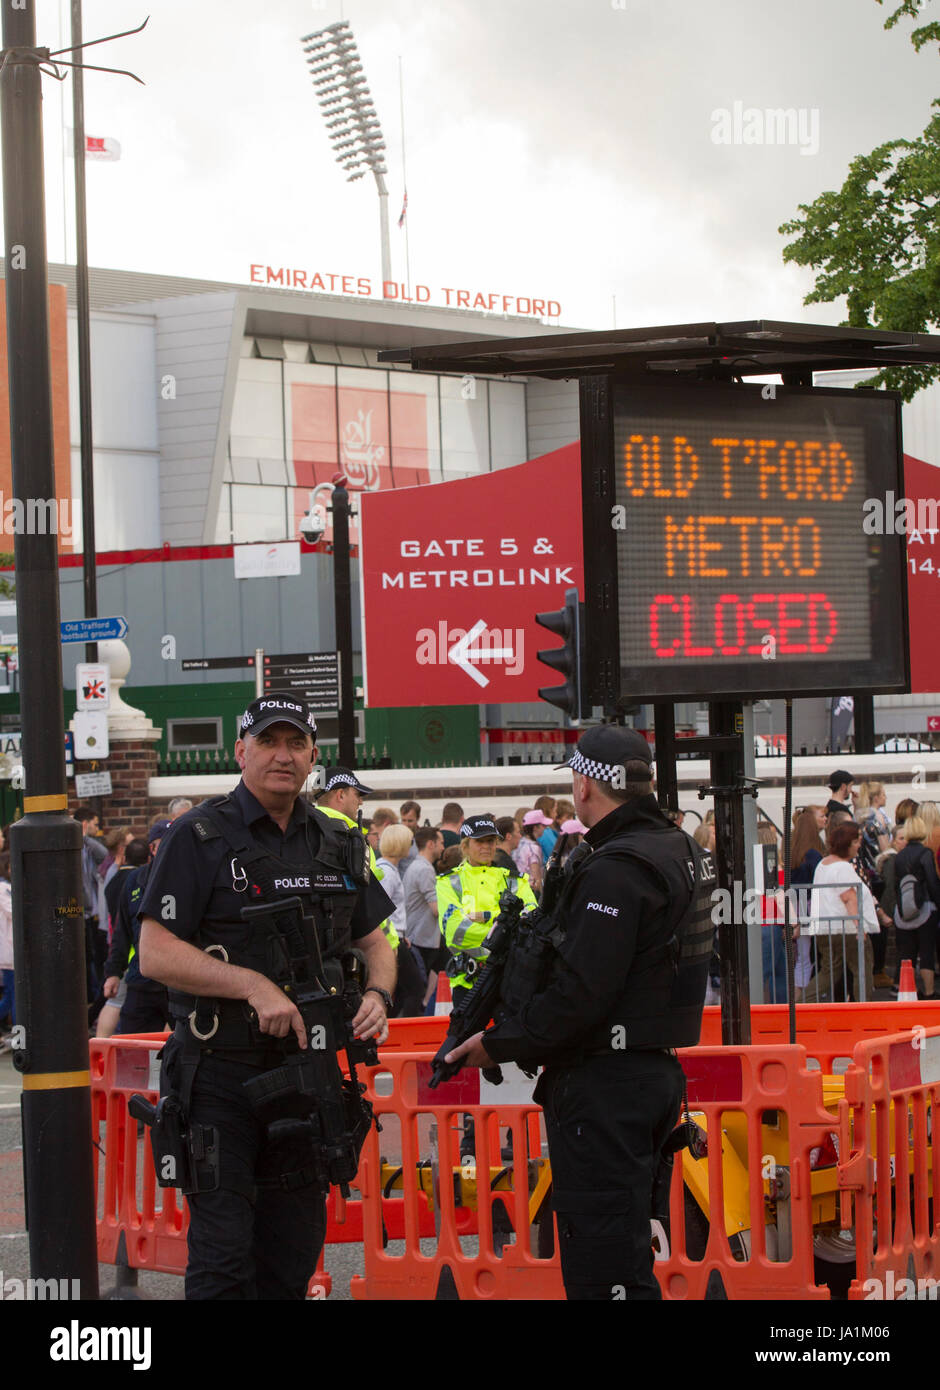 Manchester, UK. 4th June, 2017. Tight security with armed police at the One love concert at the Emirates Old Trafford stadium. Manchester Picture Credit: GARY ROBERTS/Alamy Live News Stock Photo